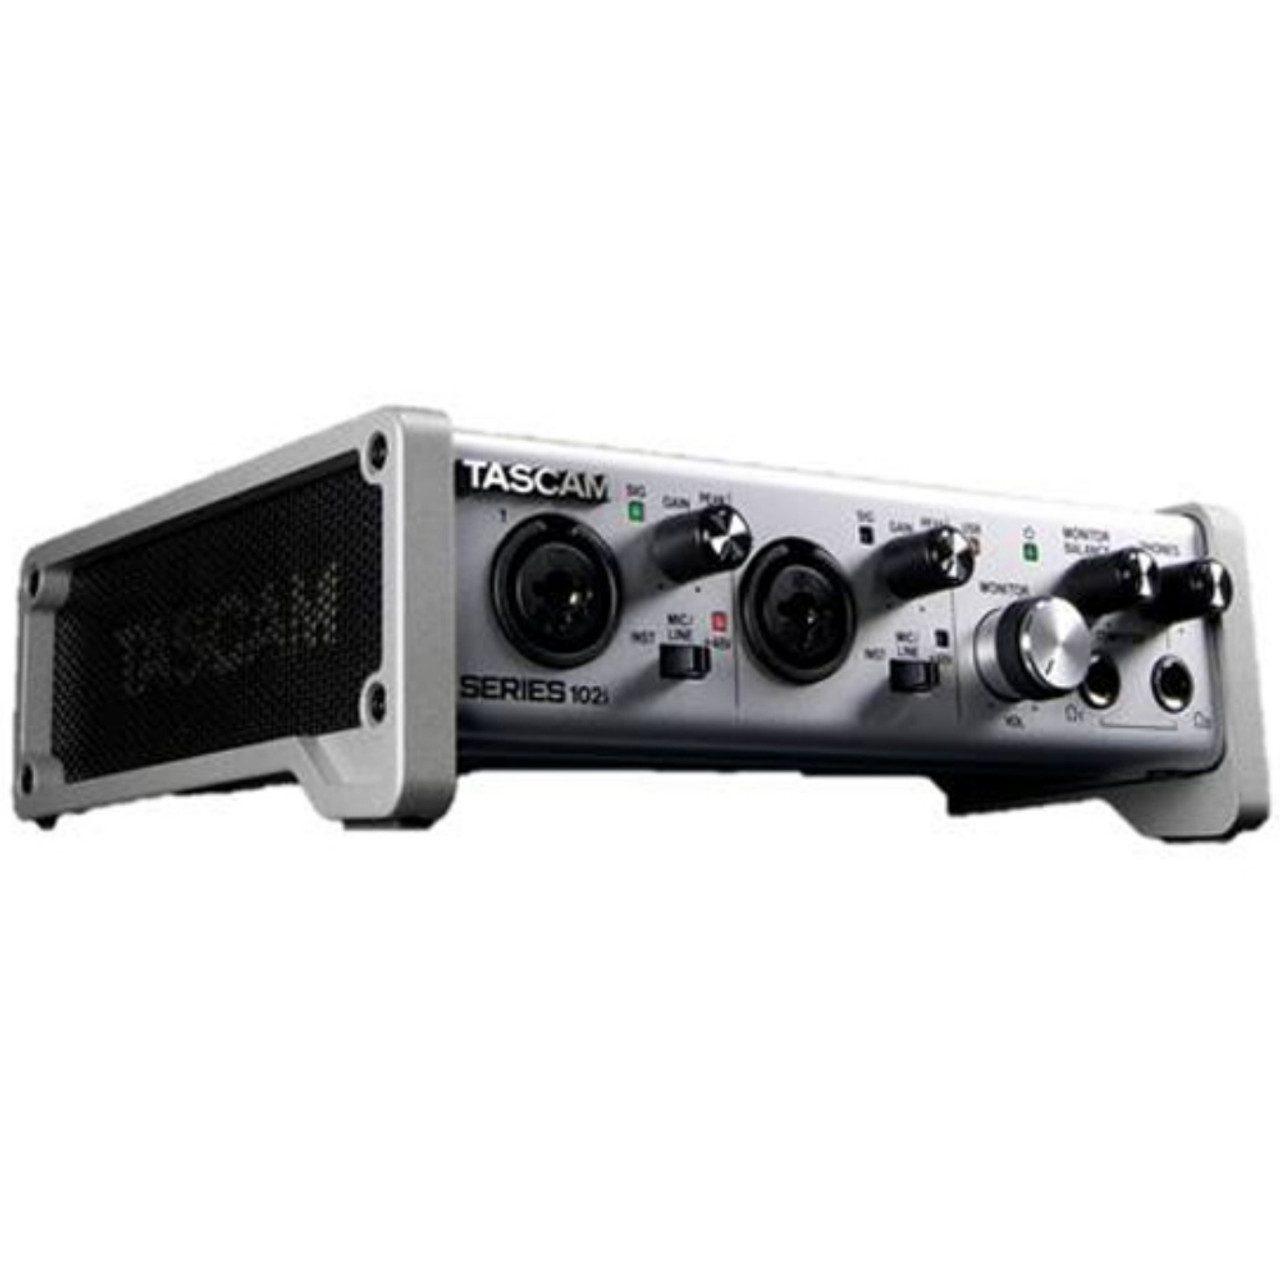 TASCAM SERIES 102i USB / Optical / MIDI 10x2 Digital Audio Interface with  Built-in FX and Software